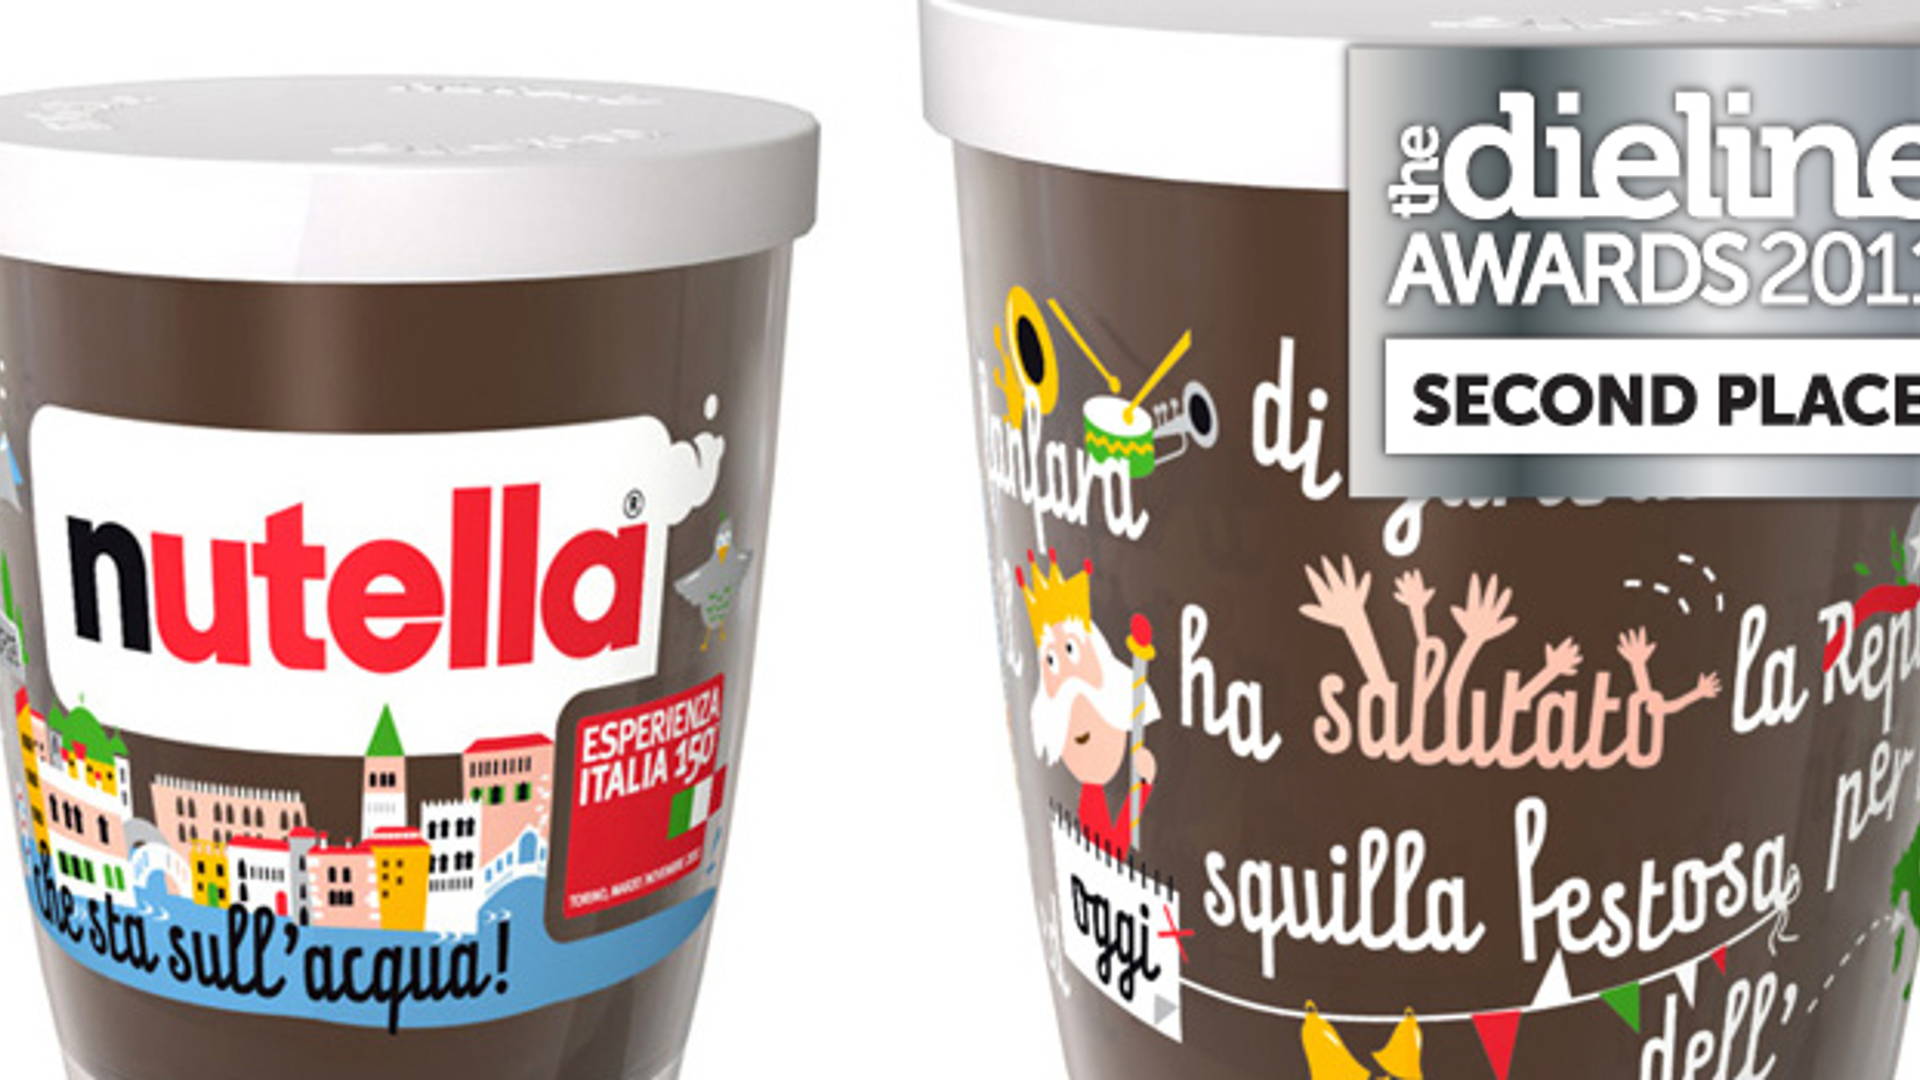 Featured image for The Dieline Awards 2011: Second Place - Nutella Ferrero Limited Edition-Celebration of the 150th Anniversary